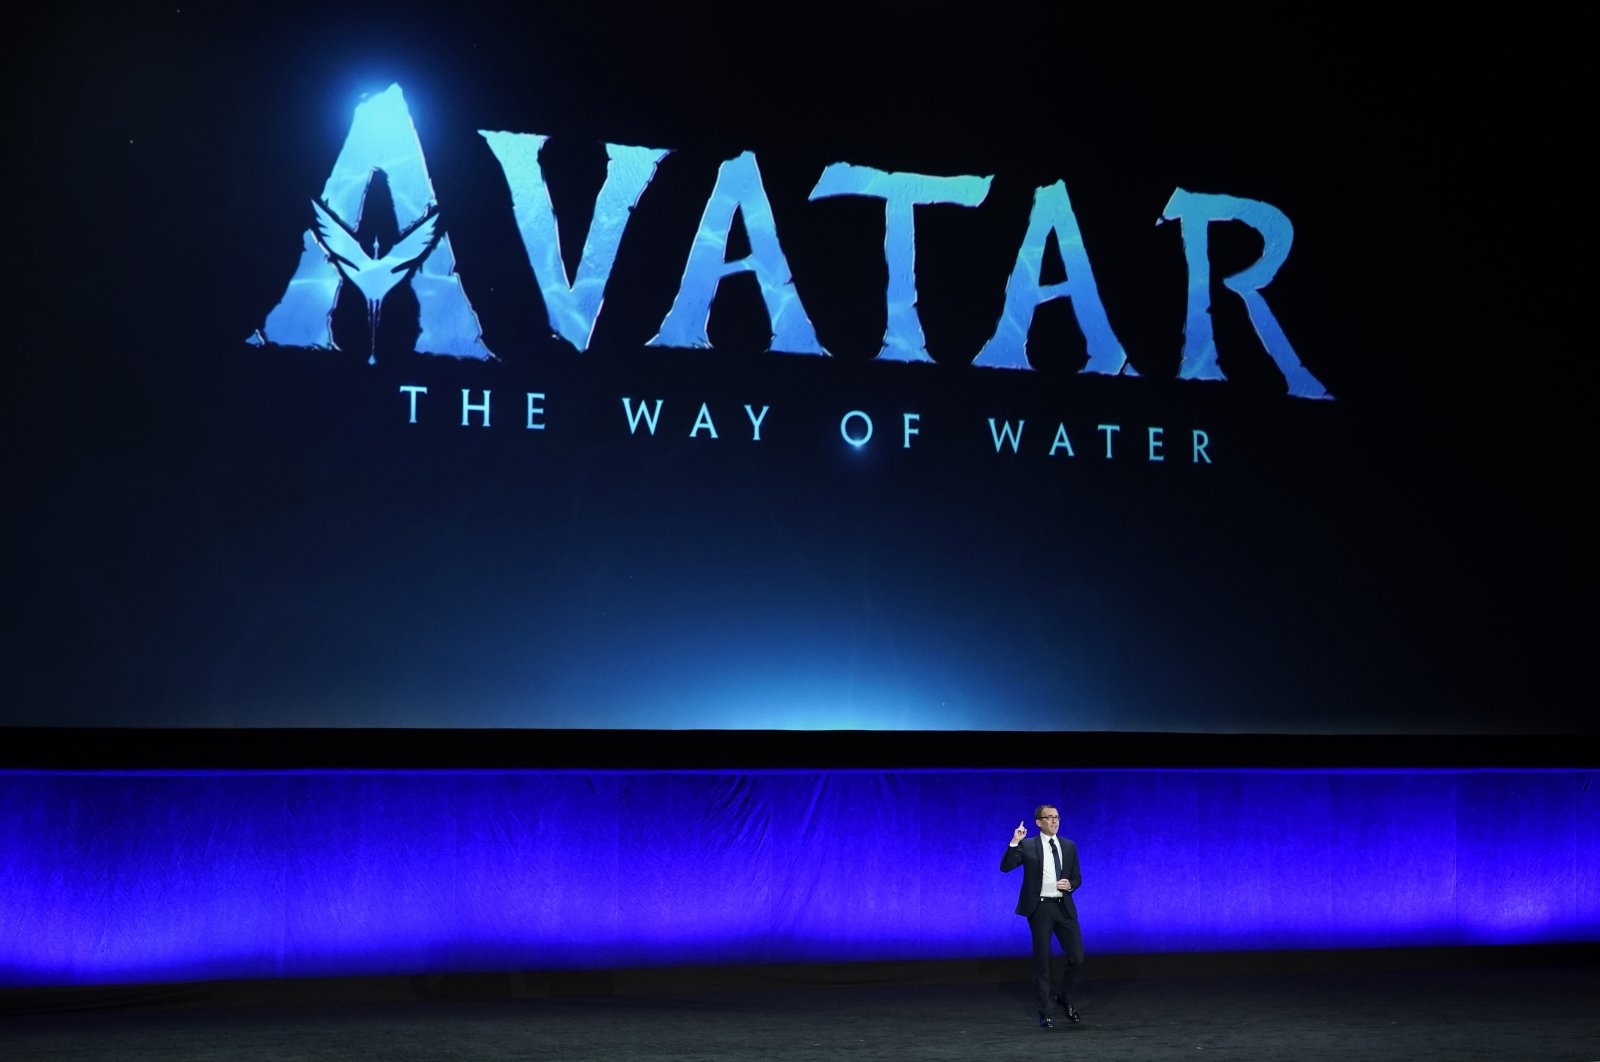 Tony Chambers, executive vice president of theatrical distribution for Walt Disney Studios, speaks underneath a graphic for the upcoming film &quot;Avatar: The Way of Water&quot; during the Walt Disney Studios presentation at CinemaCon 2022 at Caesars Palace, Las Vegas, U.S., April 27, 2022. (AP Photo)